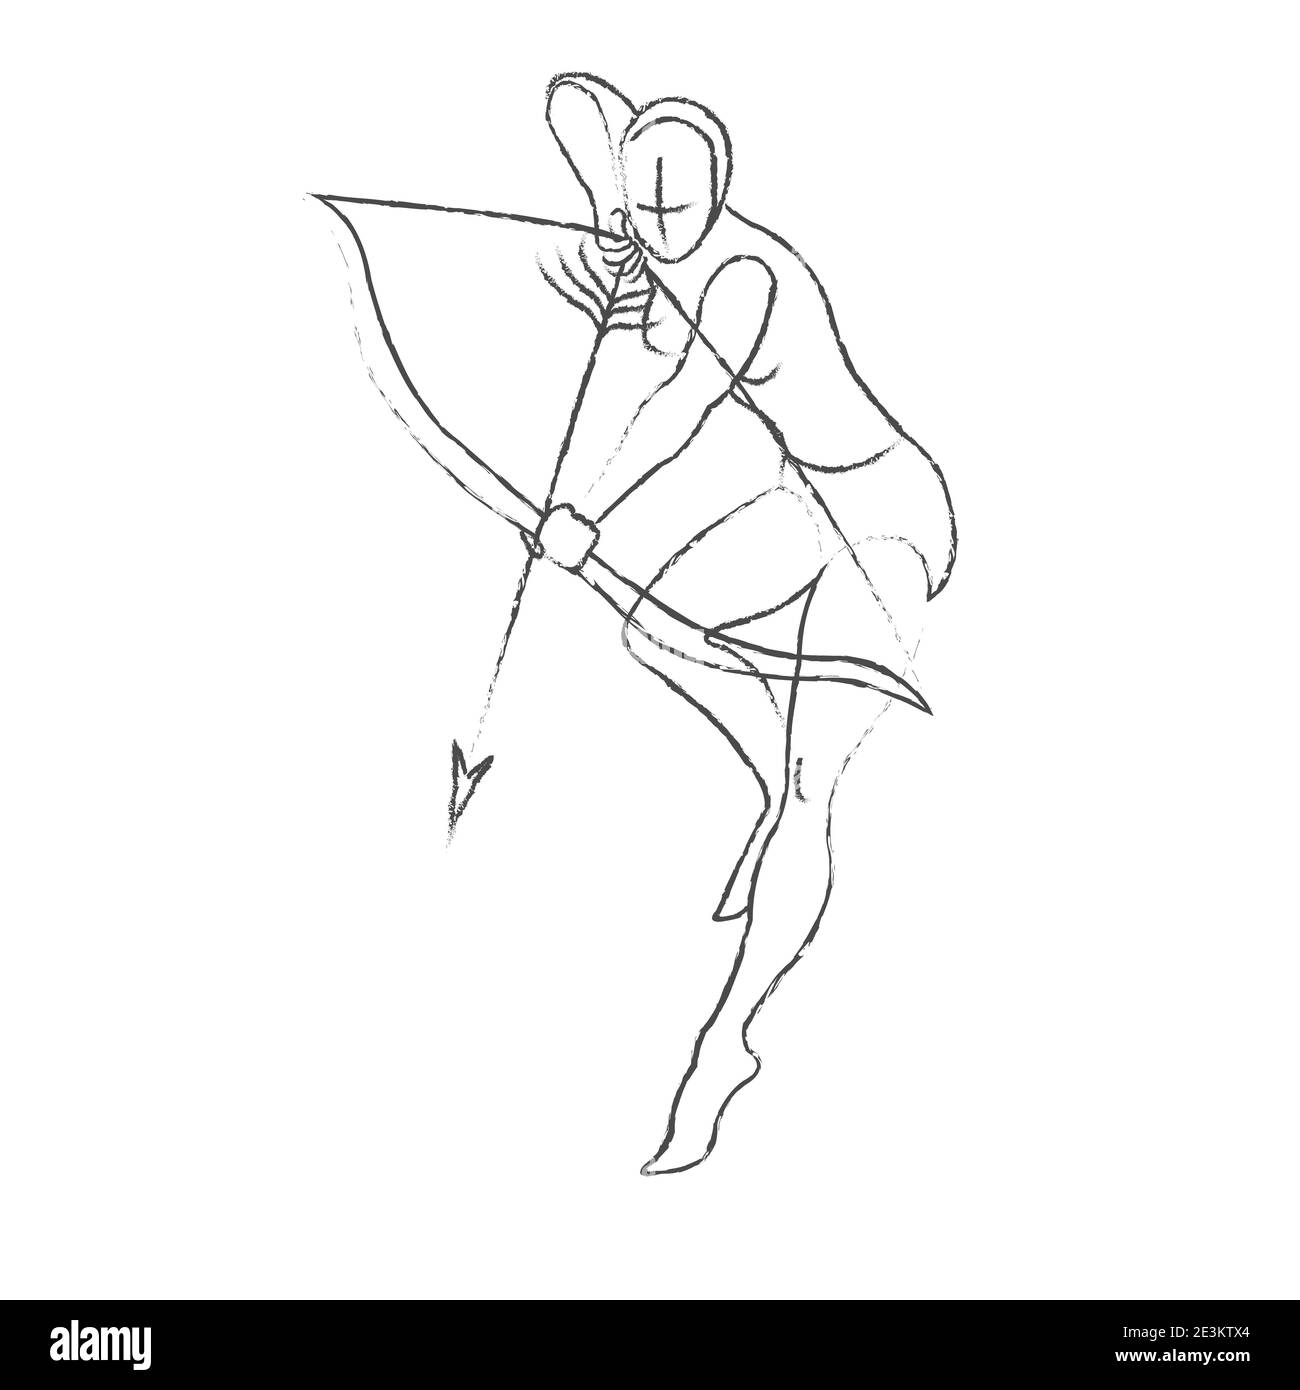 Lotr Elf Archer Action Poses 2 by halrod on deviantART | Anime poses,  Drawing reference, Character design